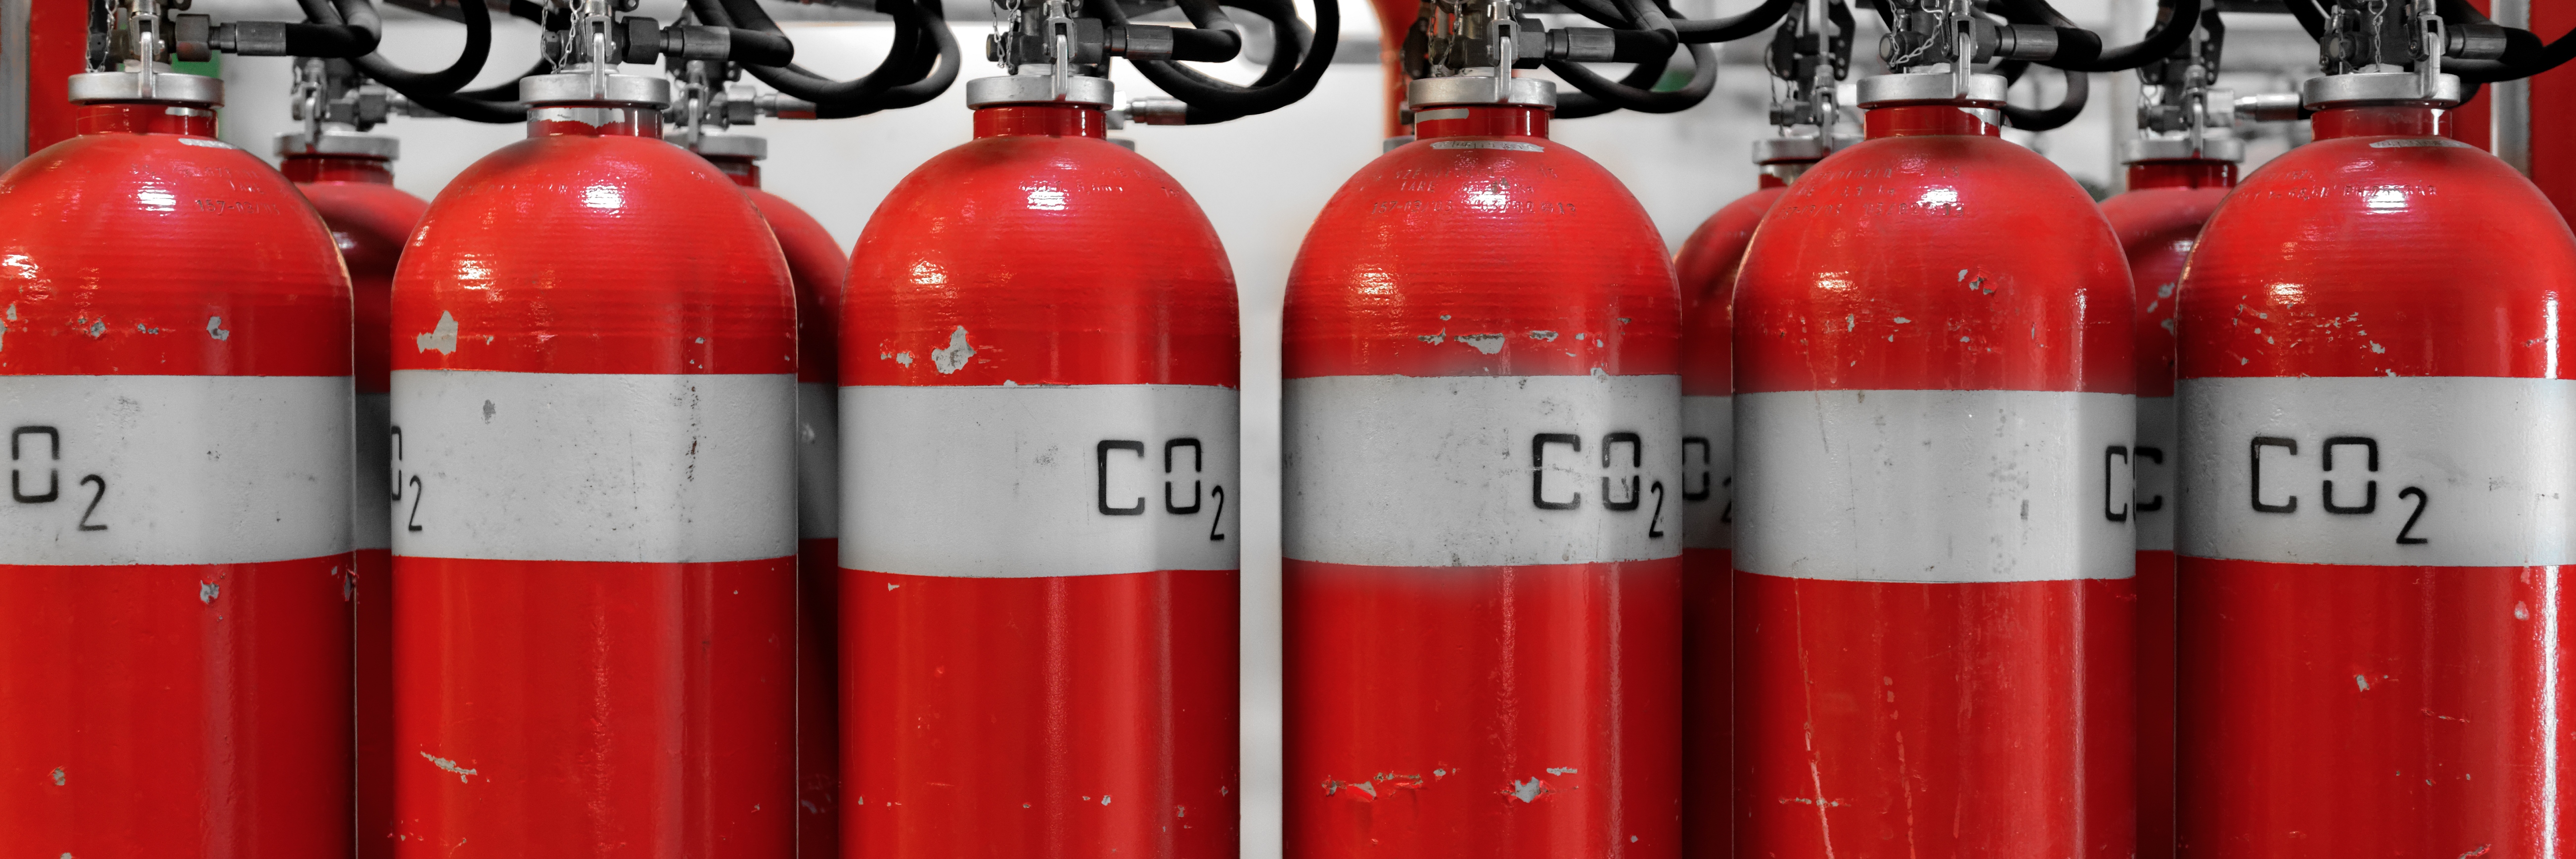 Large CO2 fire extinguishers in a thermal power plant